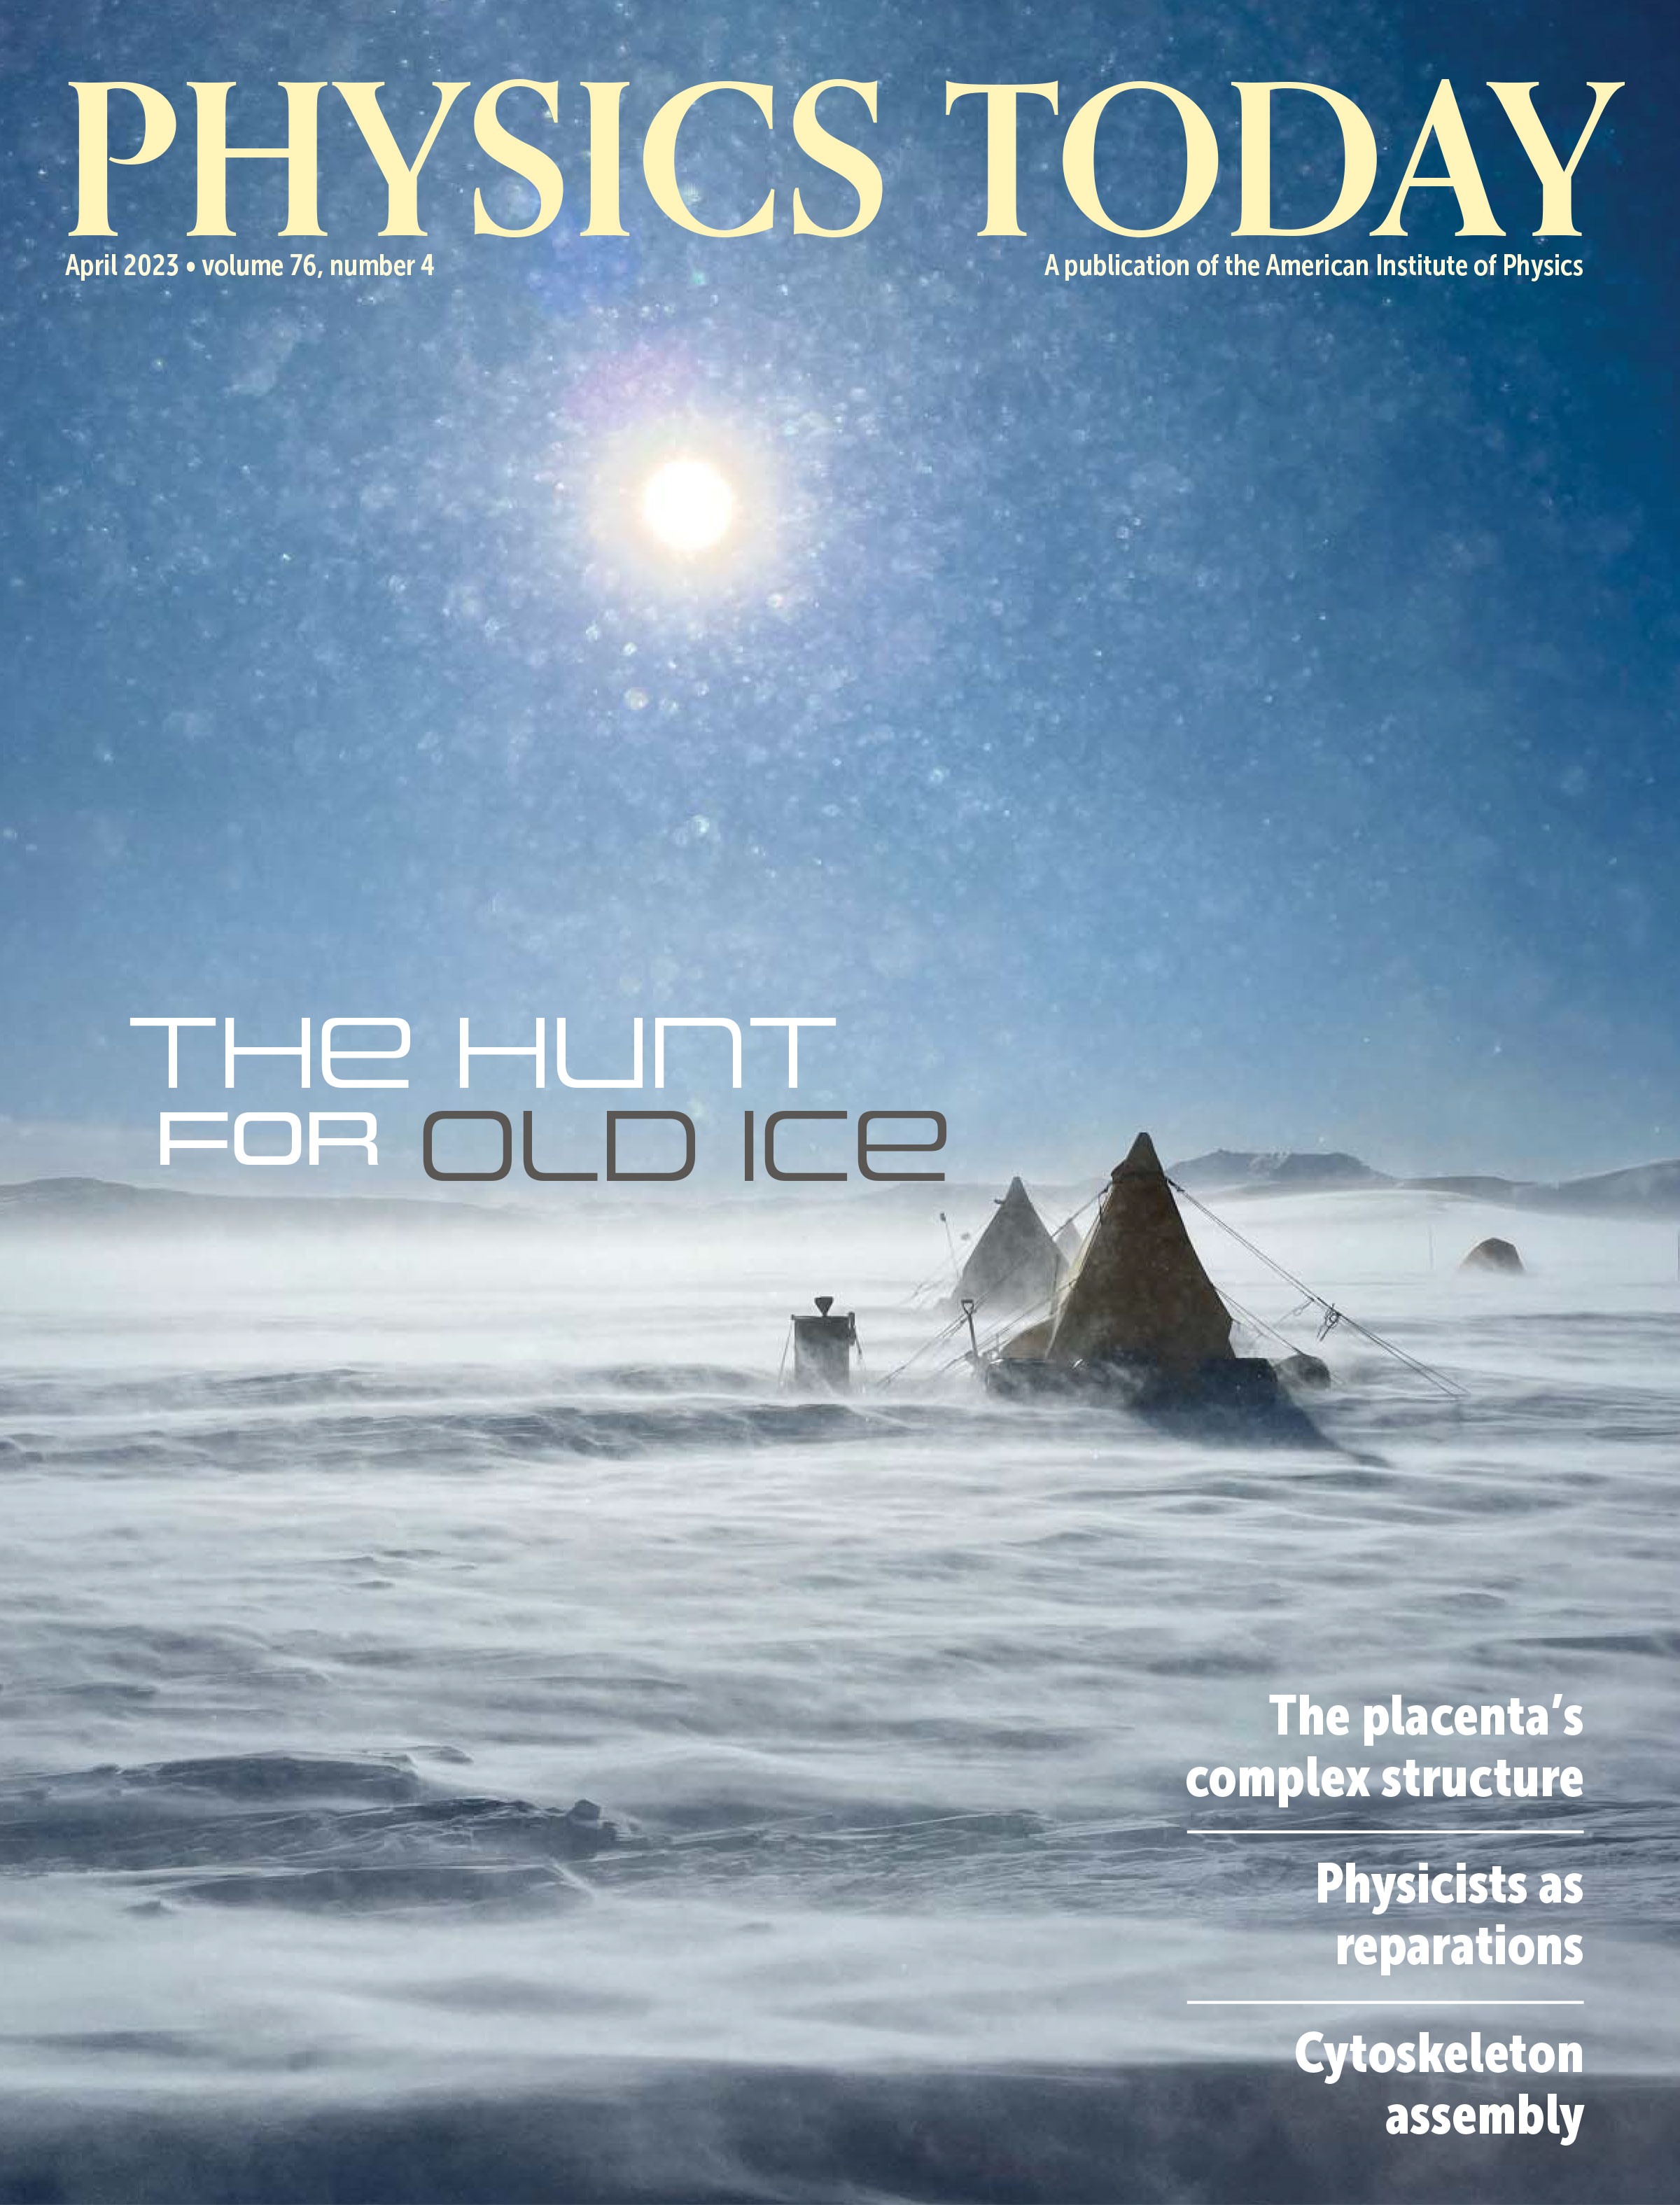 April 2023 Physics Today cover